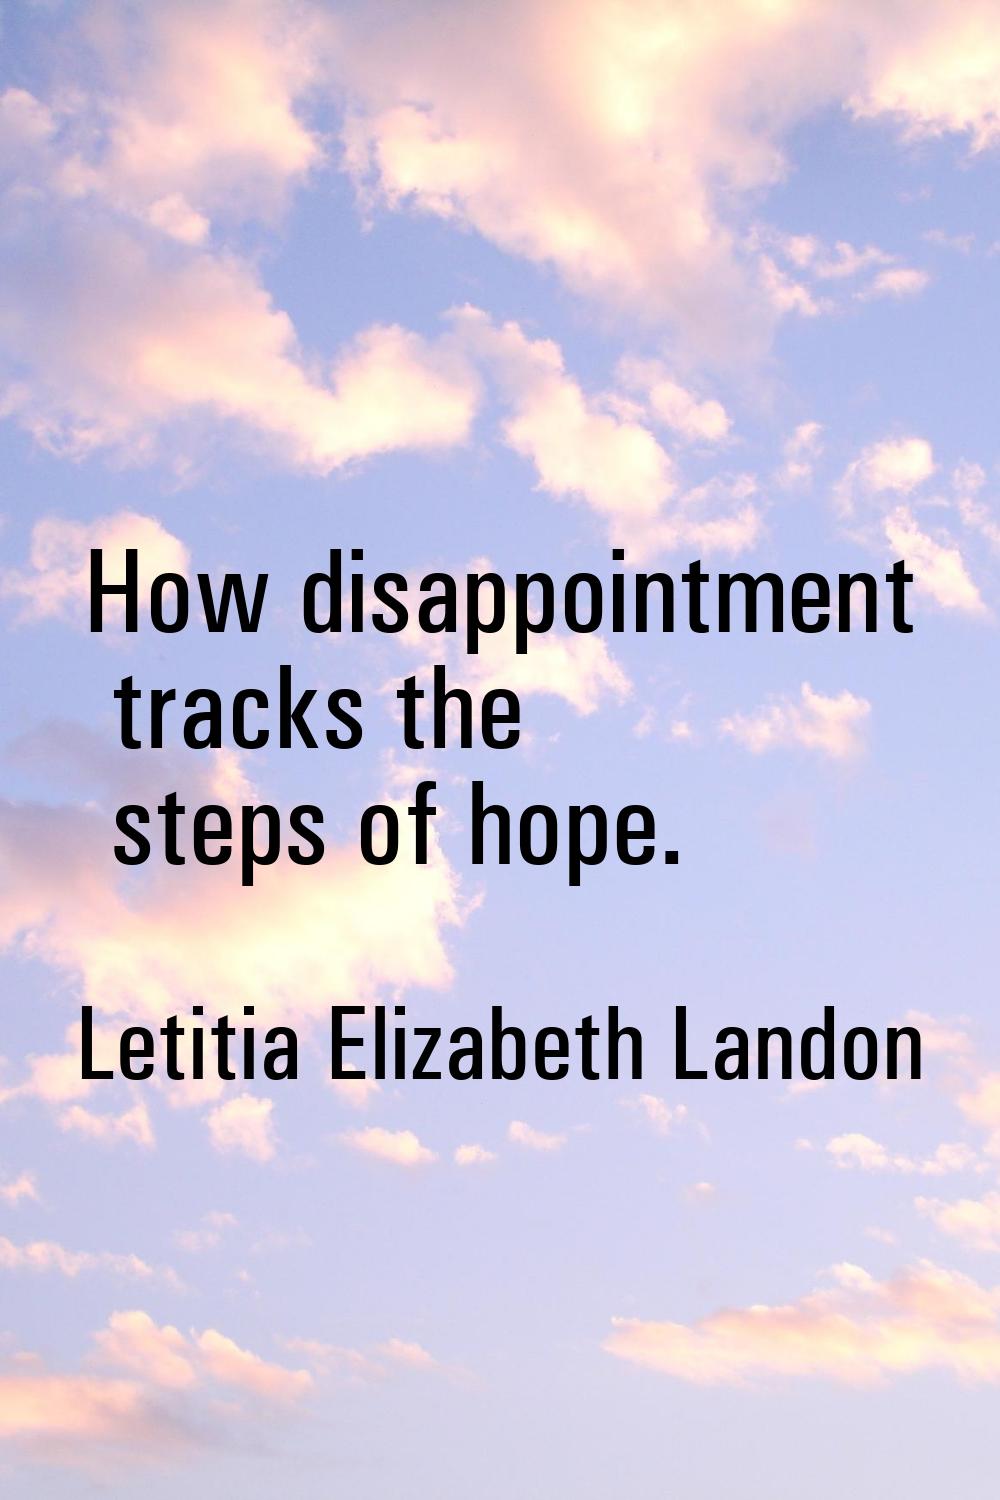 How disappointment tracks the steps of hope.